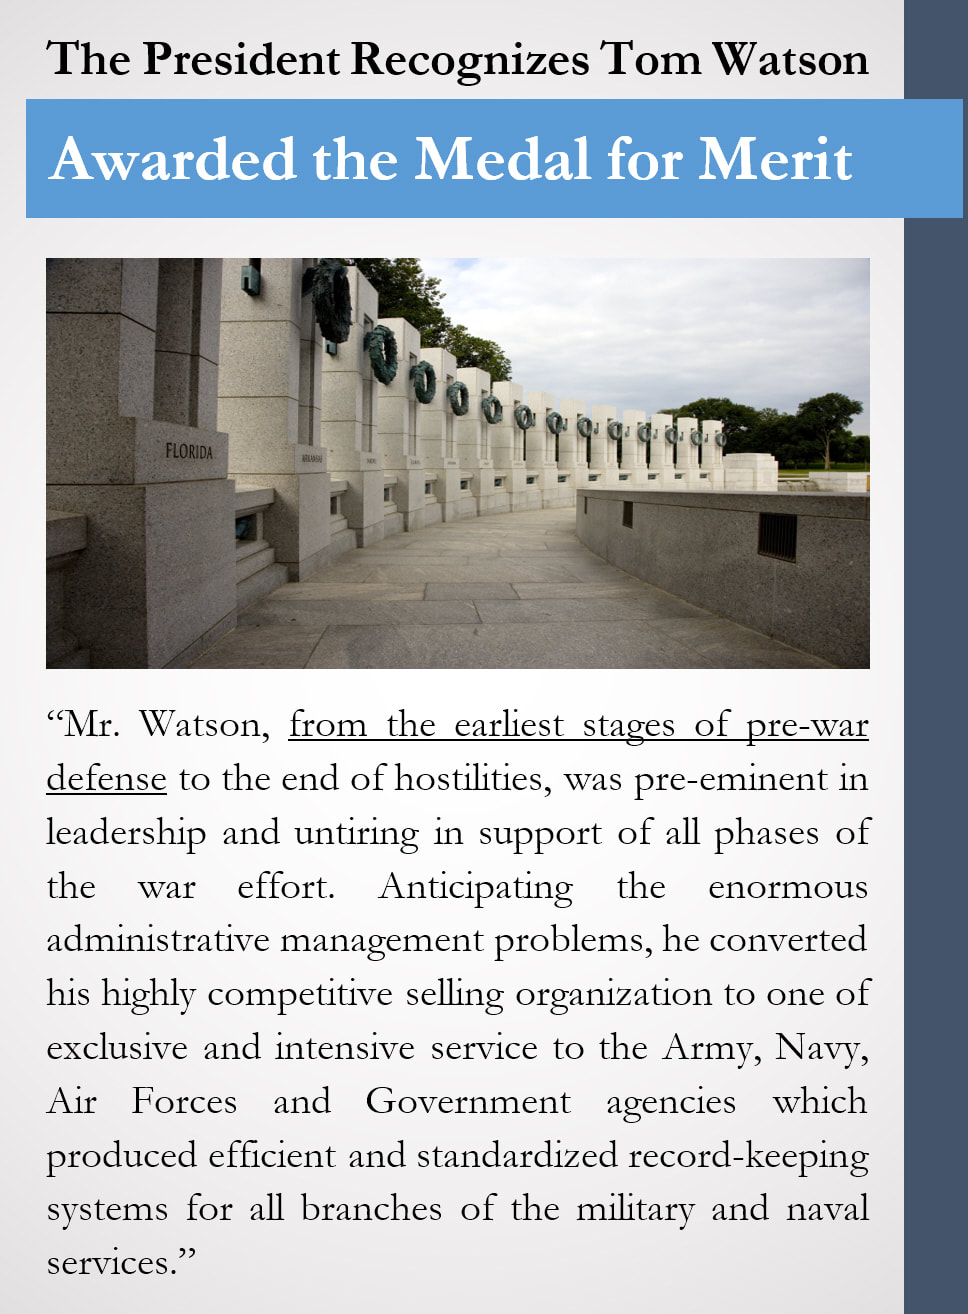 A high-quality image of a sidebar with an image of the WWII Memorial and the heading 